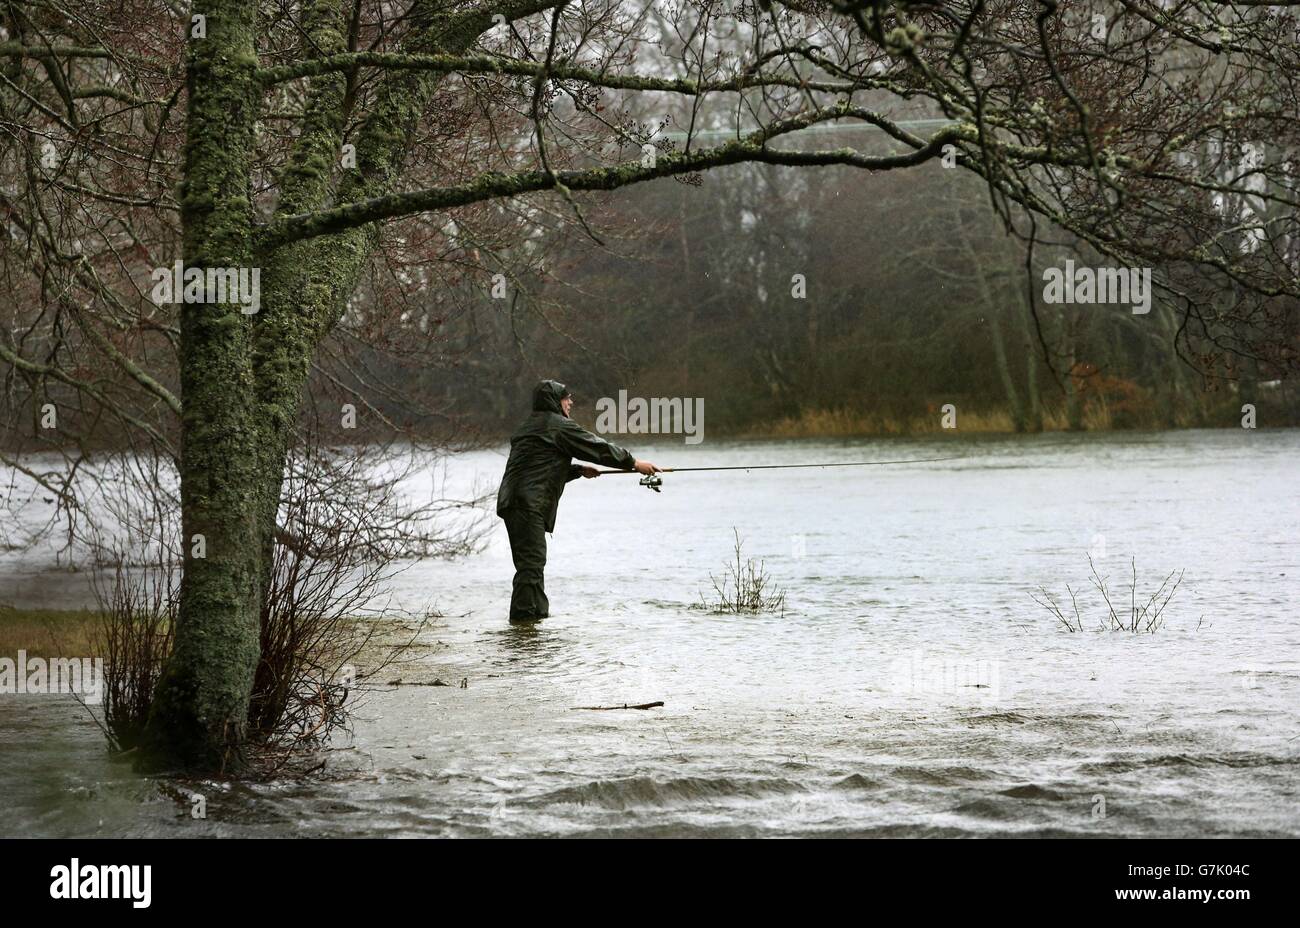 An angler on the River Tay in Scotland during the first day of the salmon fishing season. Stock Photo